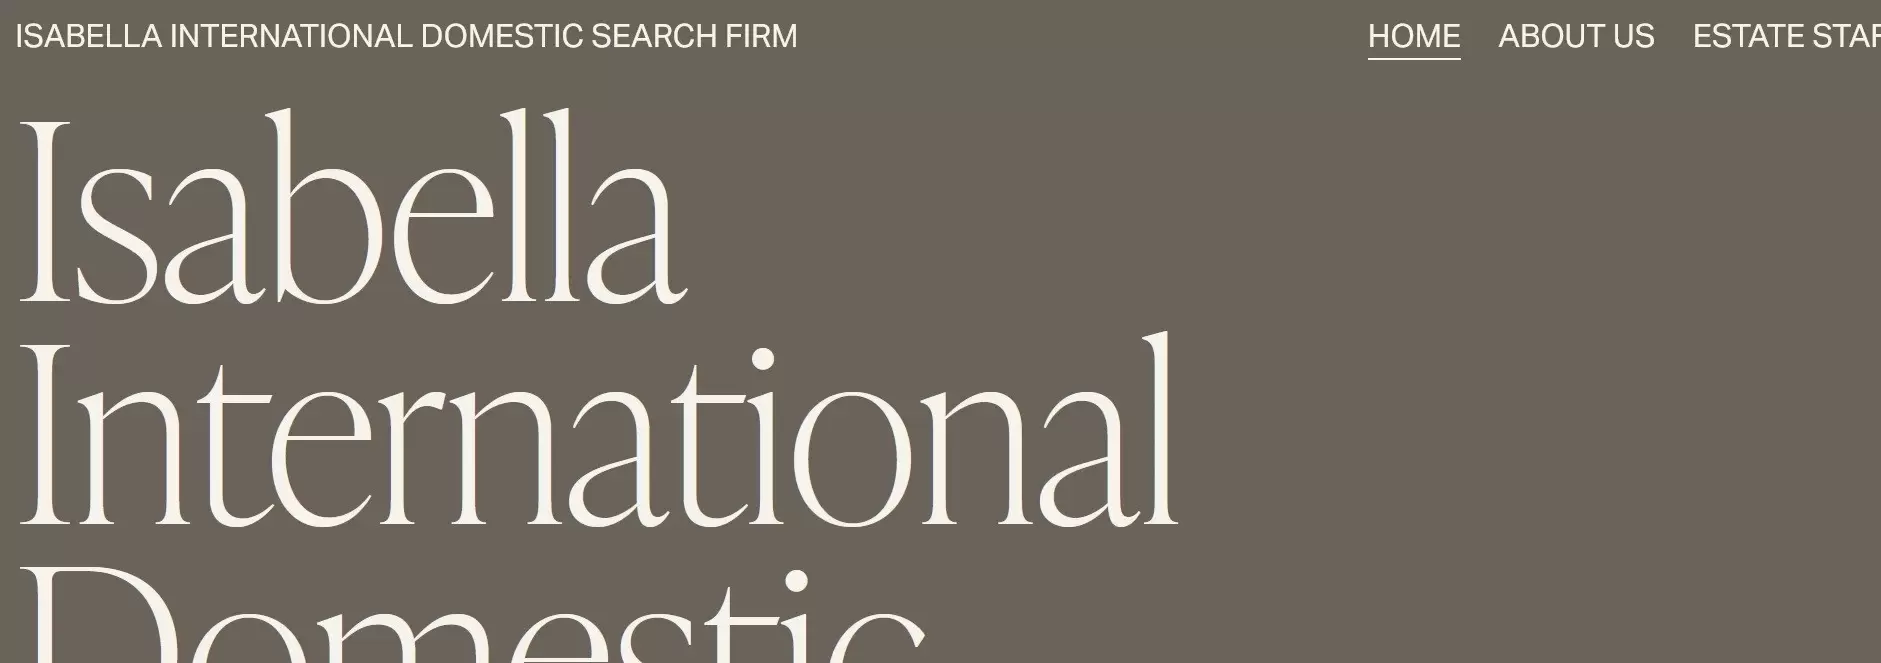 Isabella International Domestic Search Firm